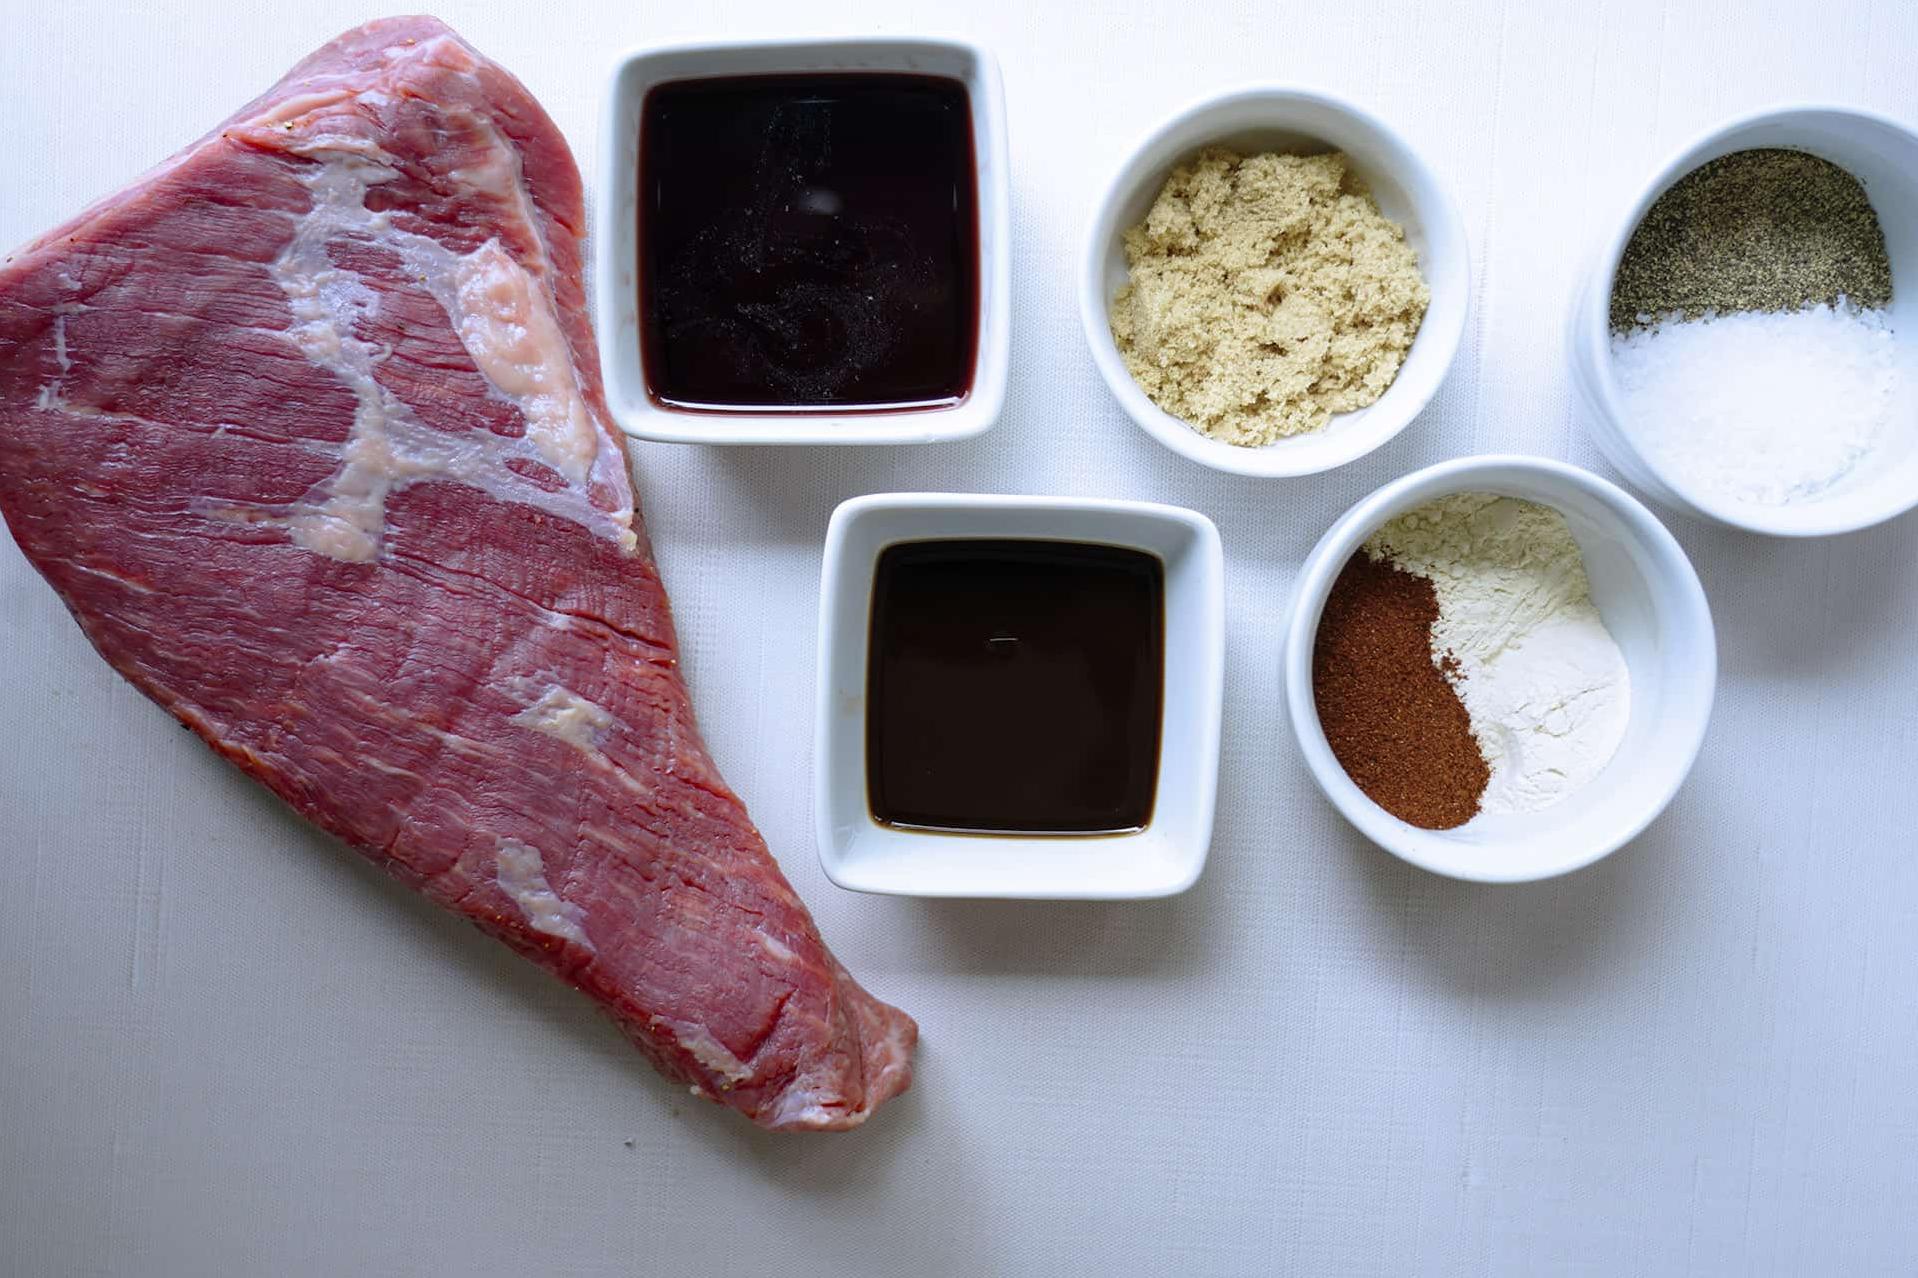  This marinade is the perfect recipe for cultured palates